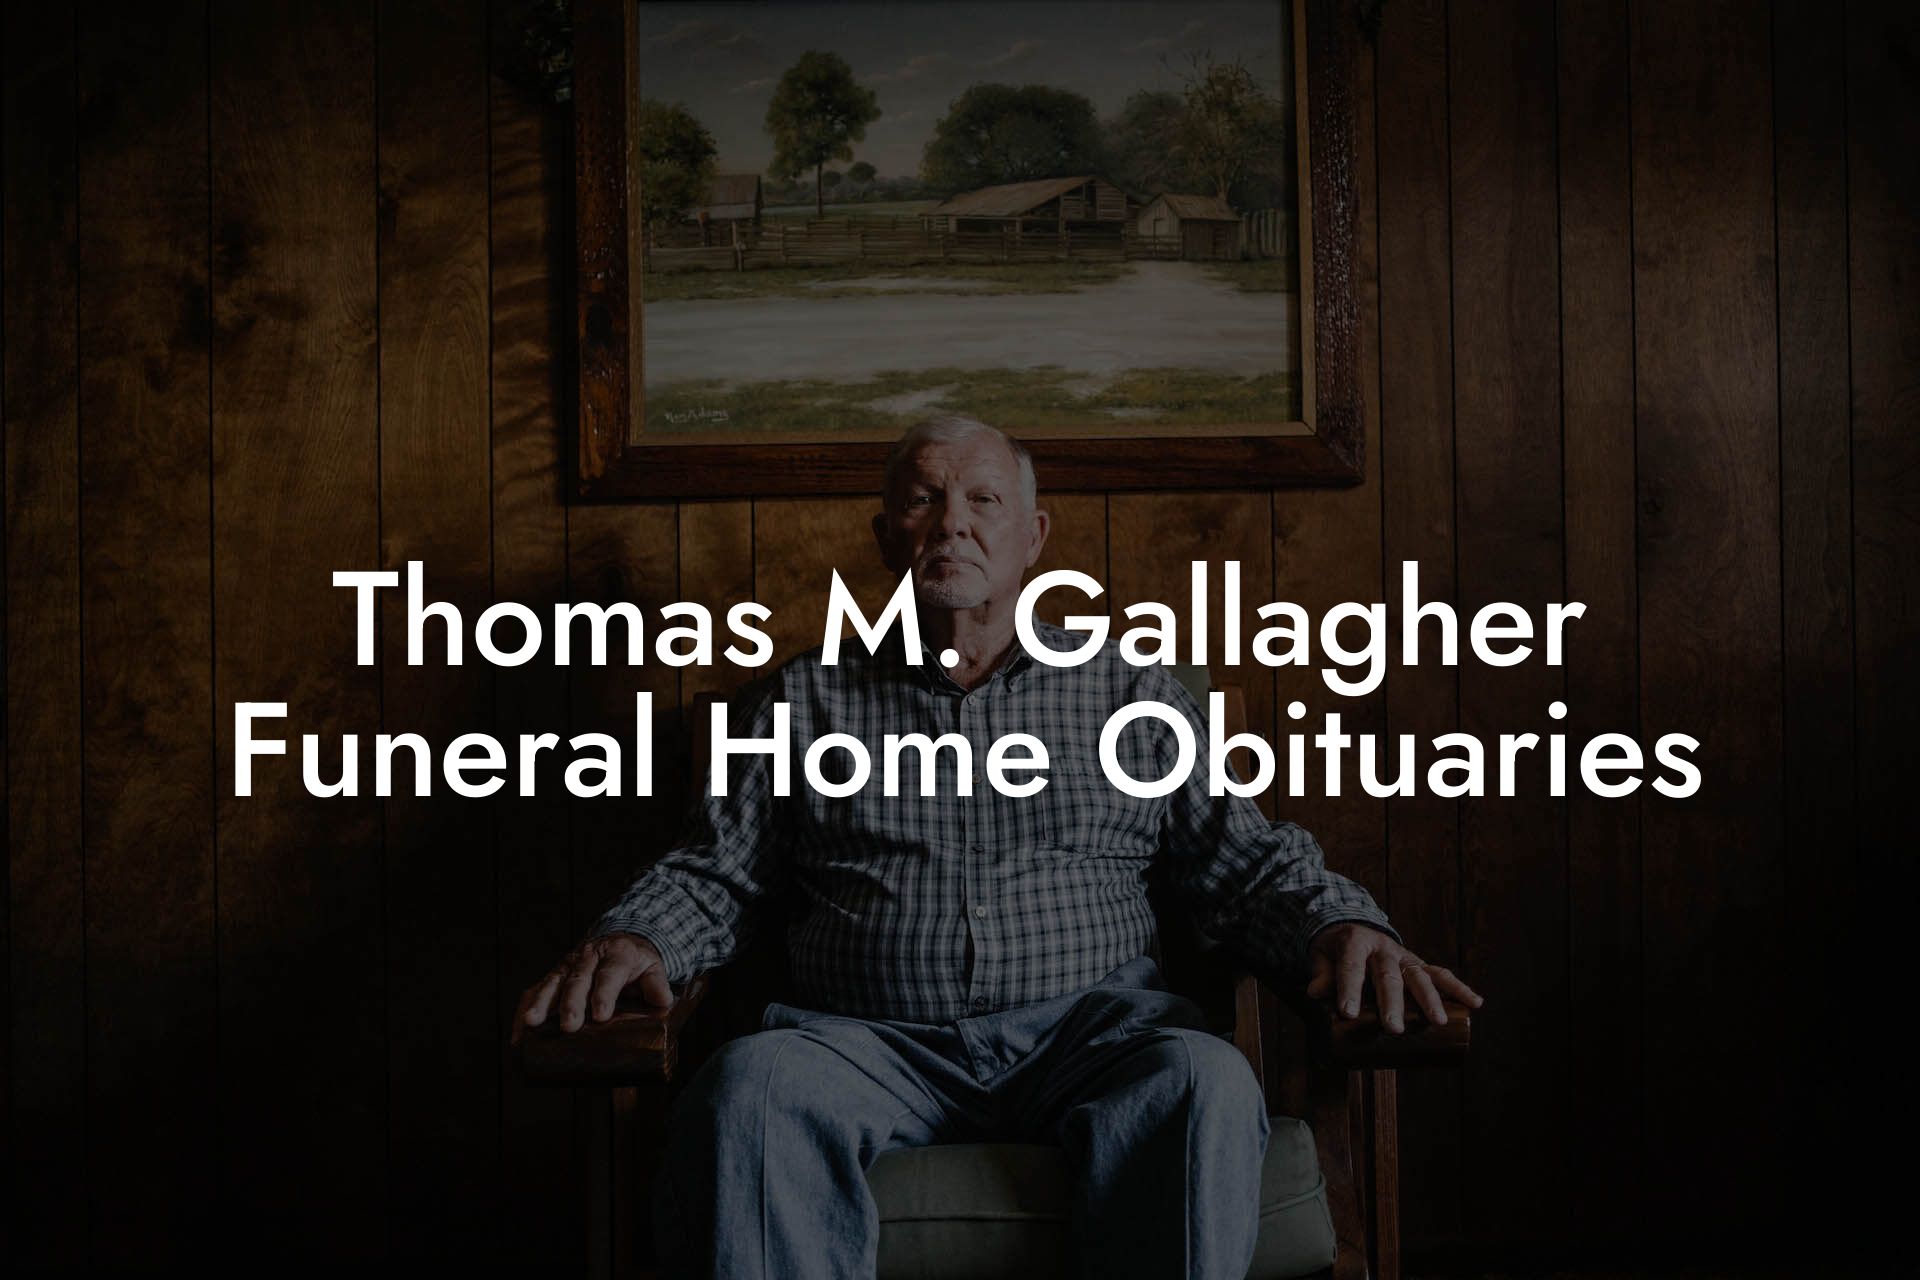 Thomas M. Gallagher Funeral Home Obituaries